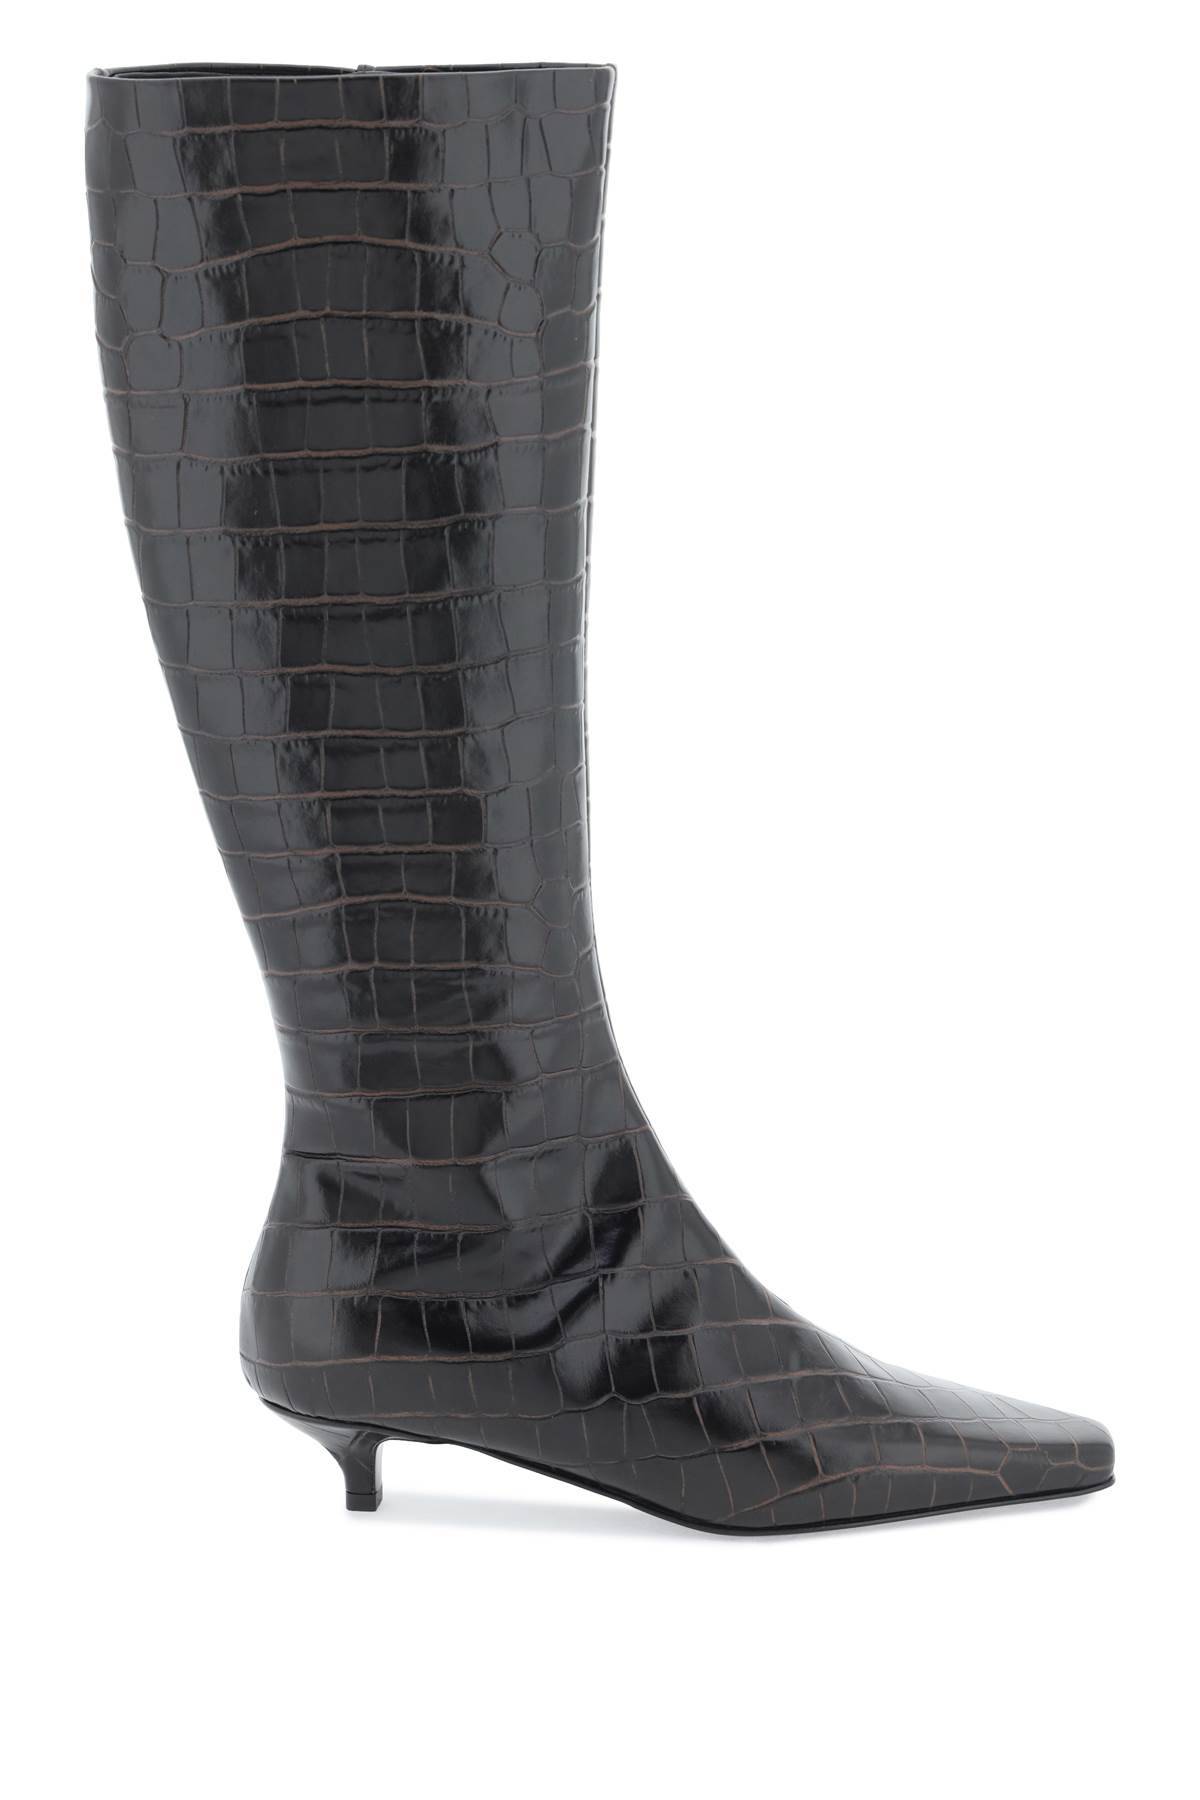 Toteme TOTEME the slim knee-high boots in crocodile-effect leather